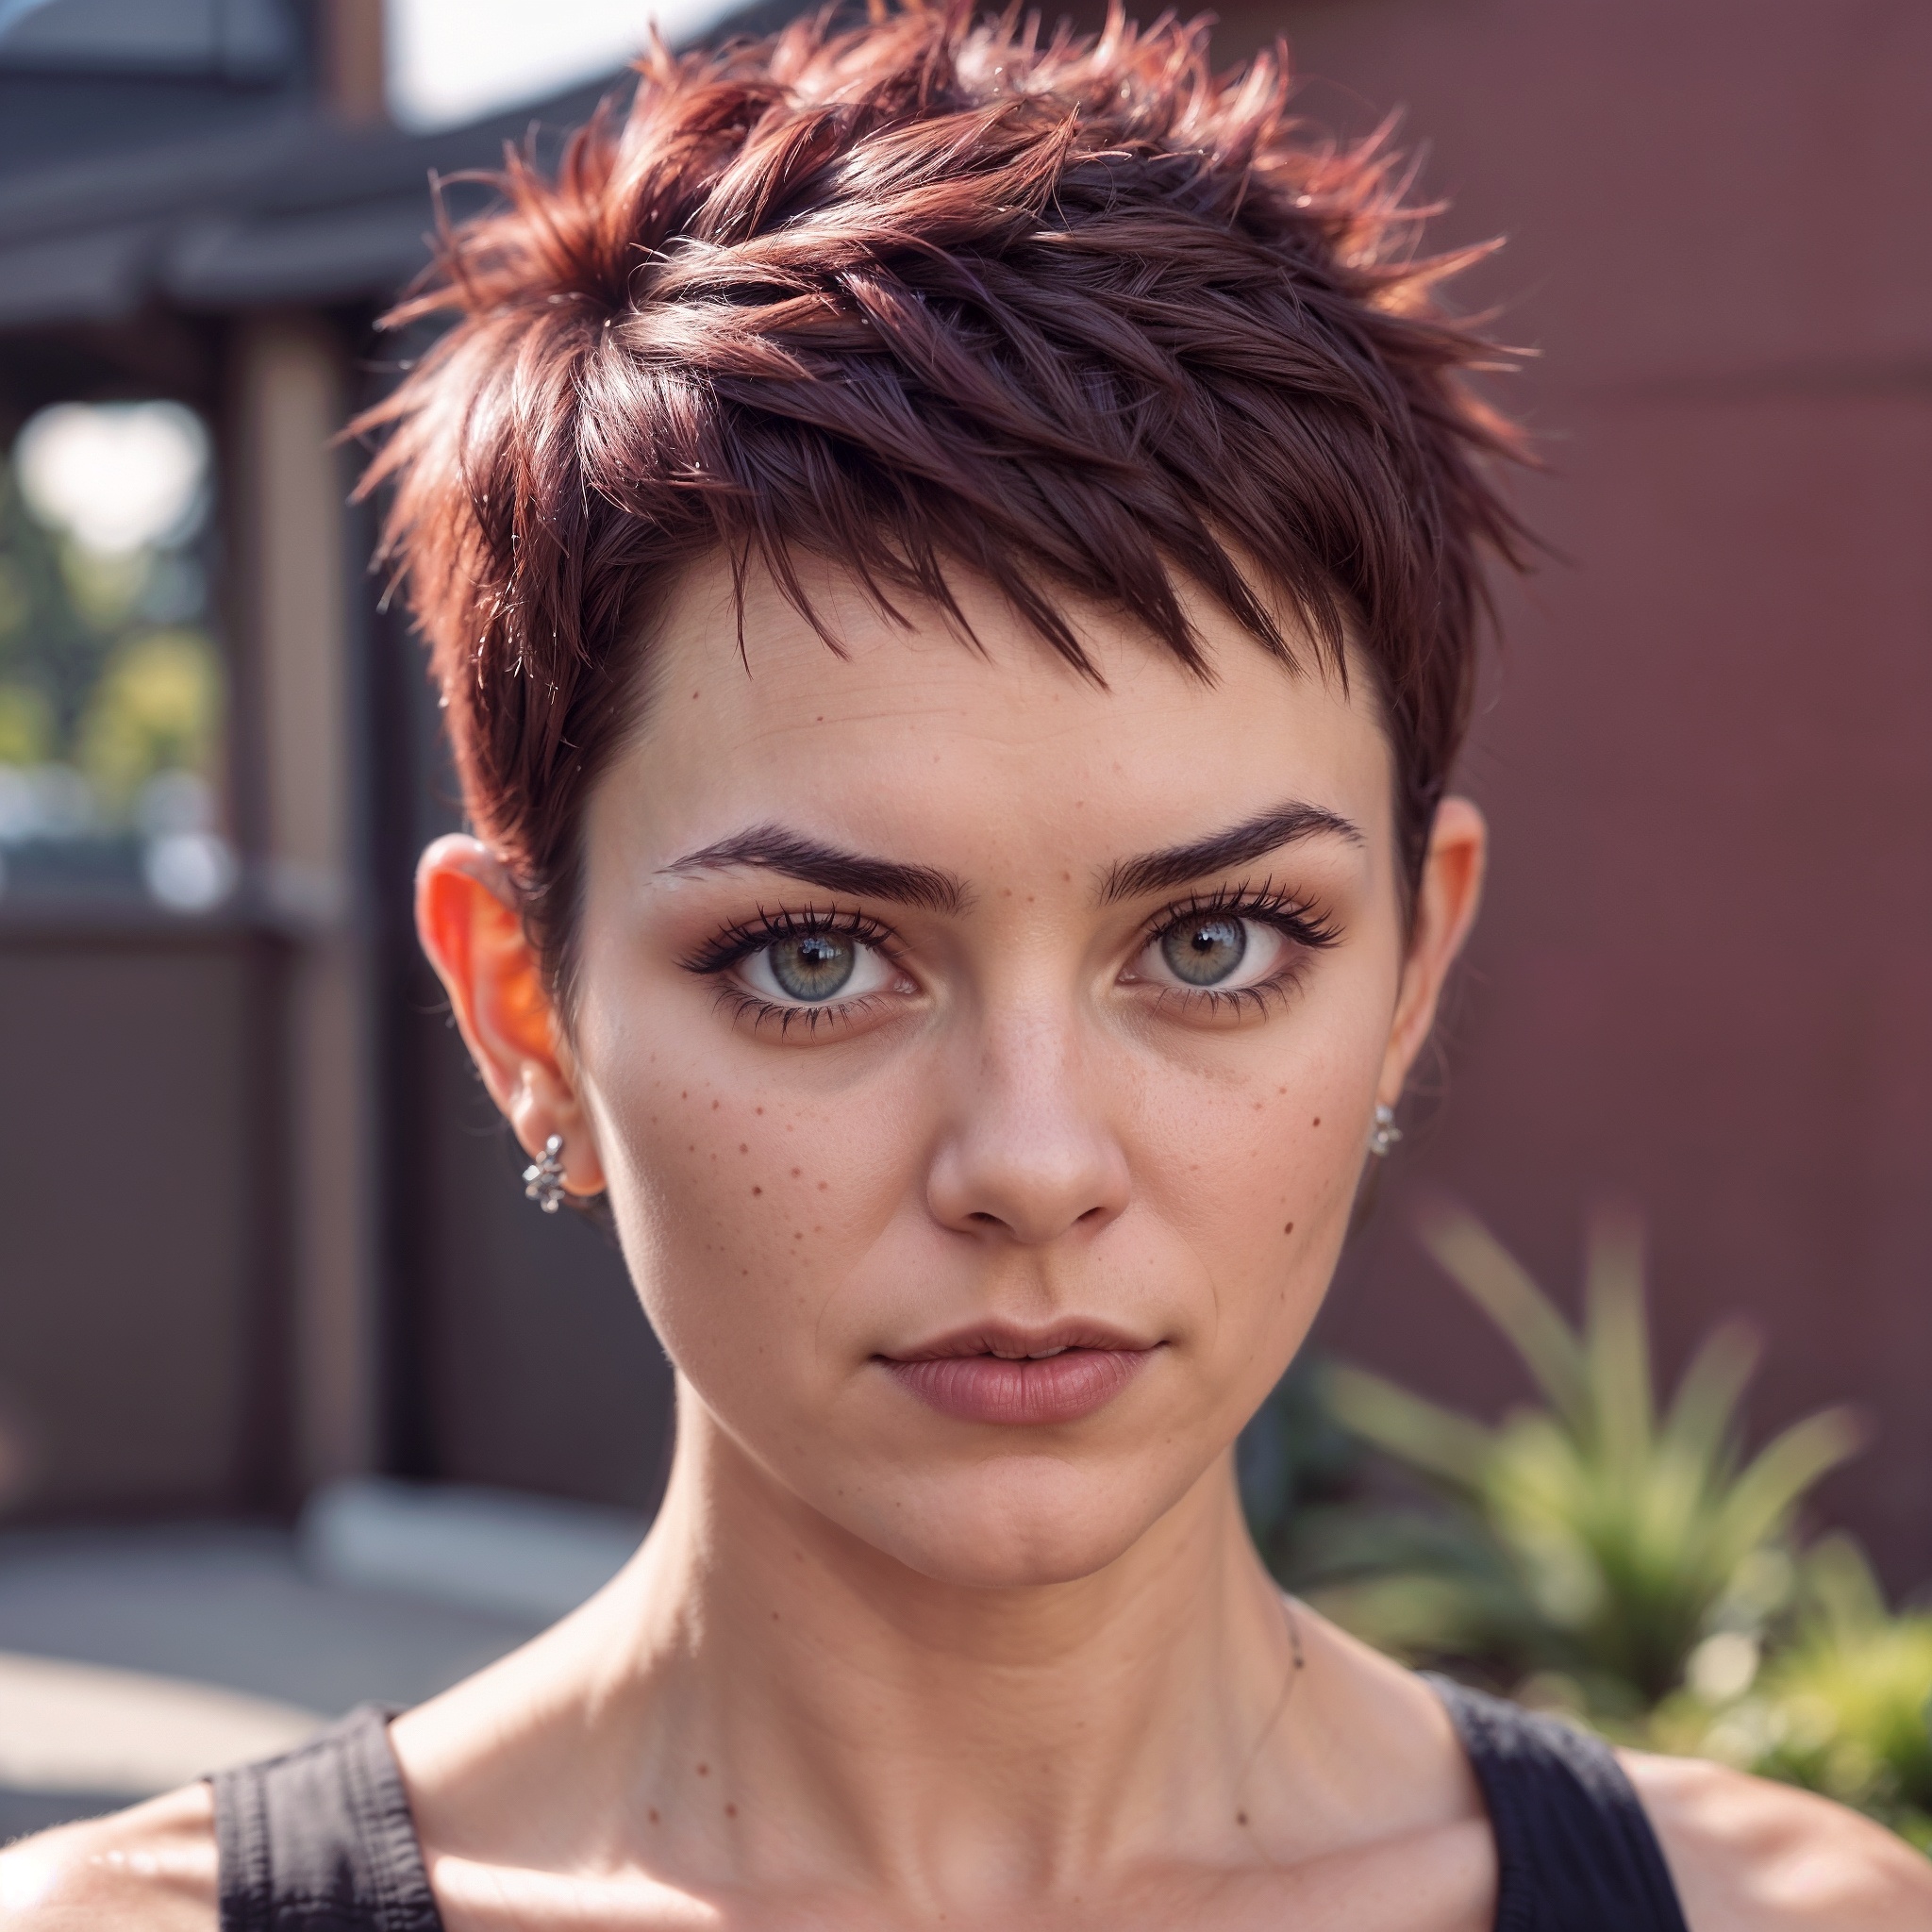 DArk Red Pixie With Spiked Top, Tapered Sides And Micro Bangs